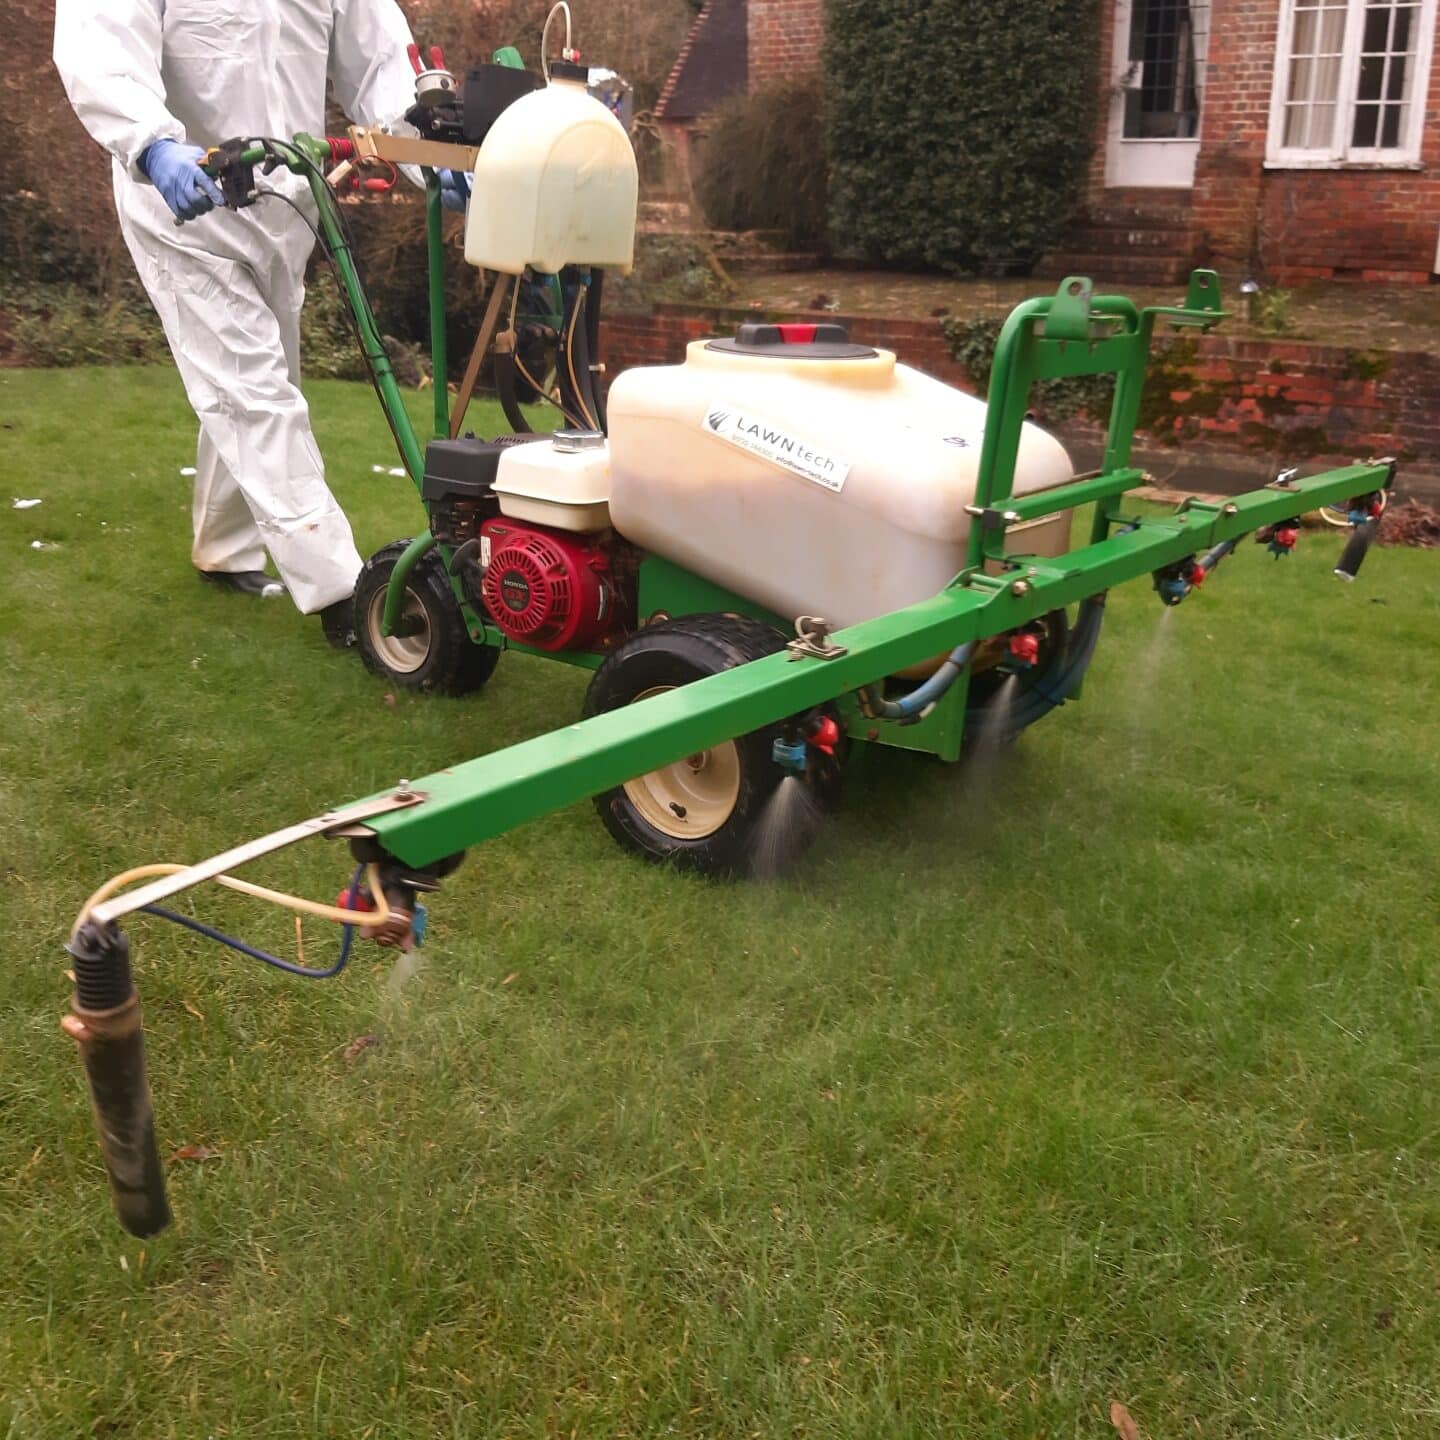 Technician driving a machine spraying herbicide onto a lawn